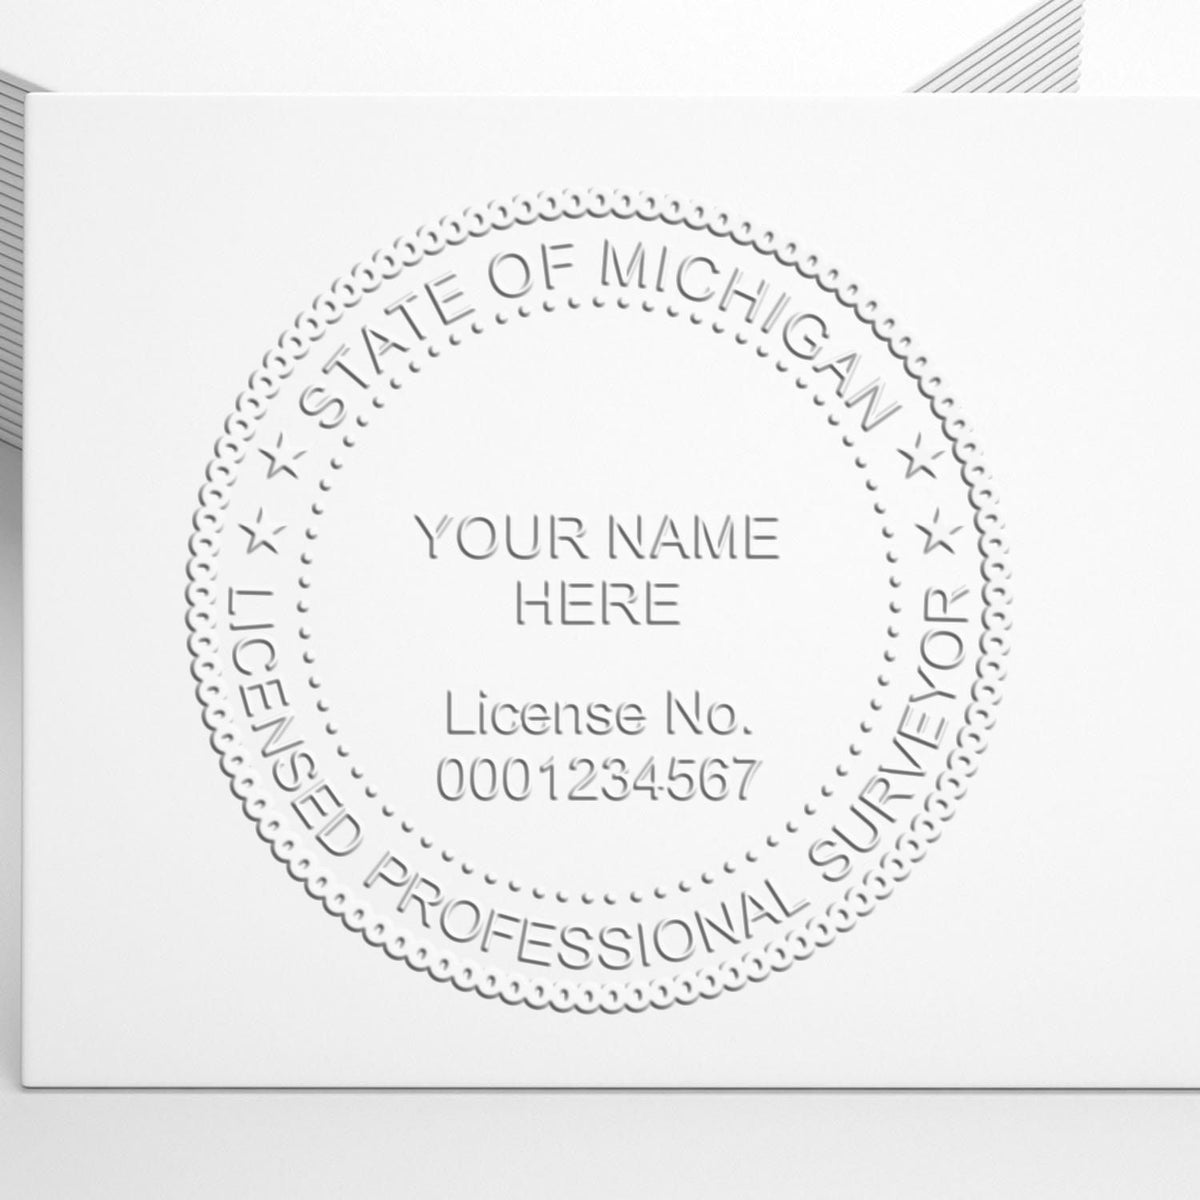 The Long Reach Michigan Land Surveyor Seal stamp impression comes to life with a crisp, detailed photo on paper - showcasing true professional quality.